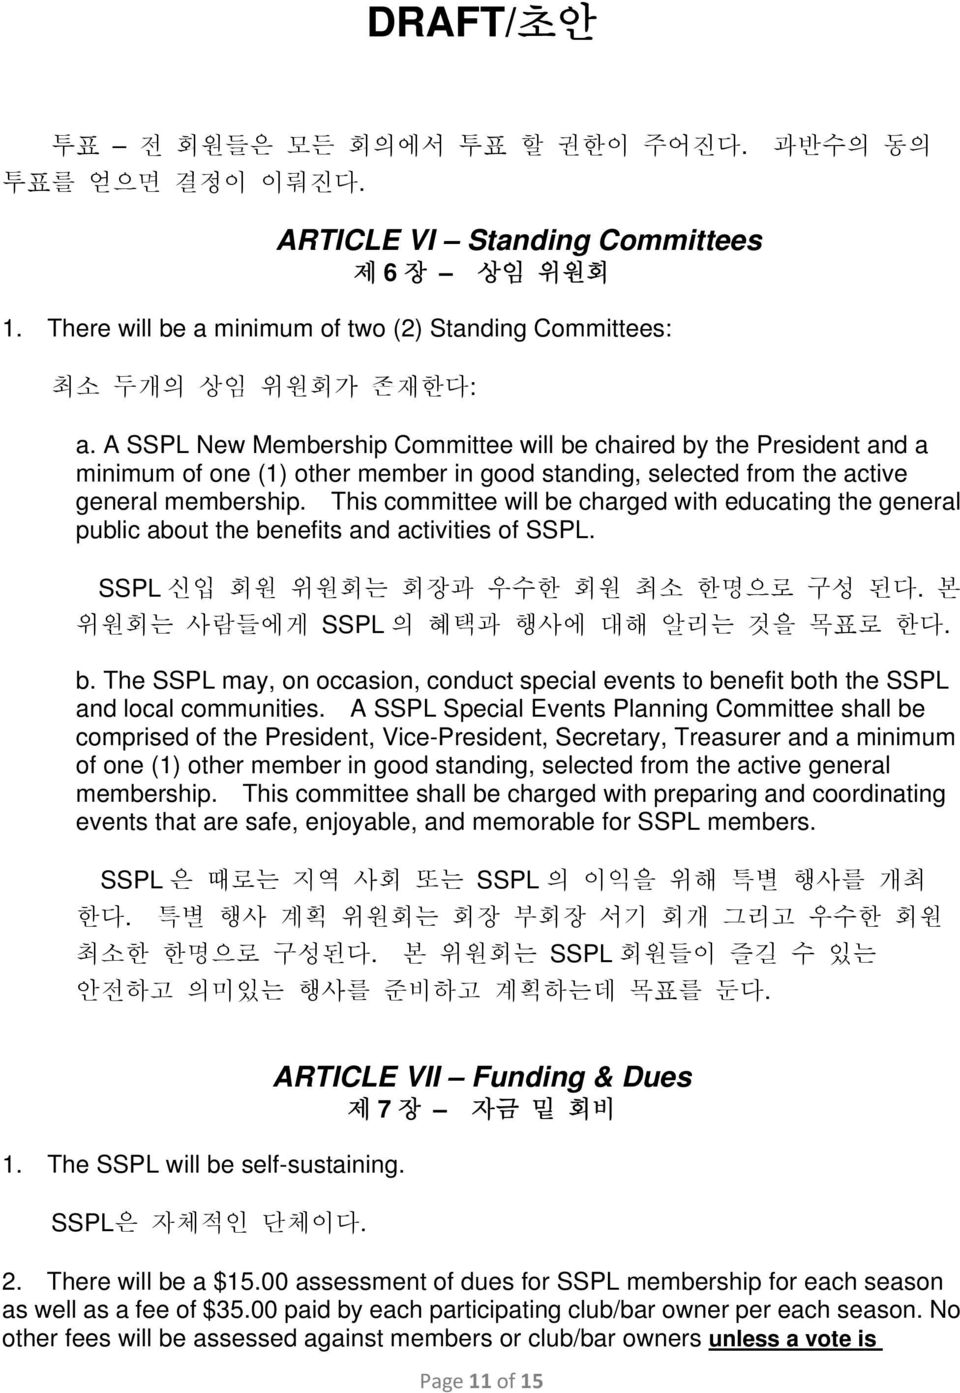 This committee will be charged with educating the general public about the benefits and activities of SSPL. SSPL 신입 회원 위원회는 회장과 우수한 회원 최소 한명으로 구성 된다. 본 위원회는 사람들에게 SSPL 의 혜택과 행사에 대해 알리는 것을 목표로 한다. b. The SSPL may, on occasion, conduct special events to benefit both the SSPL and local communities.